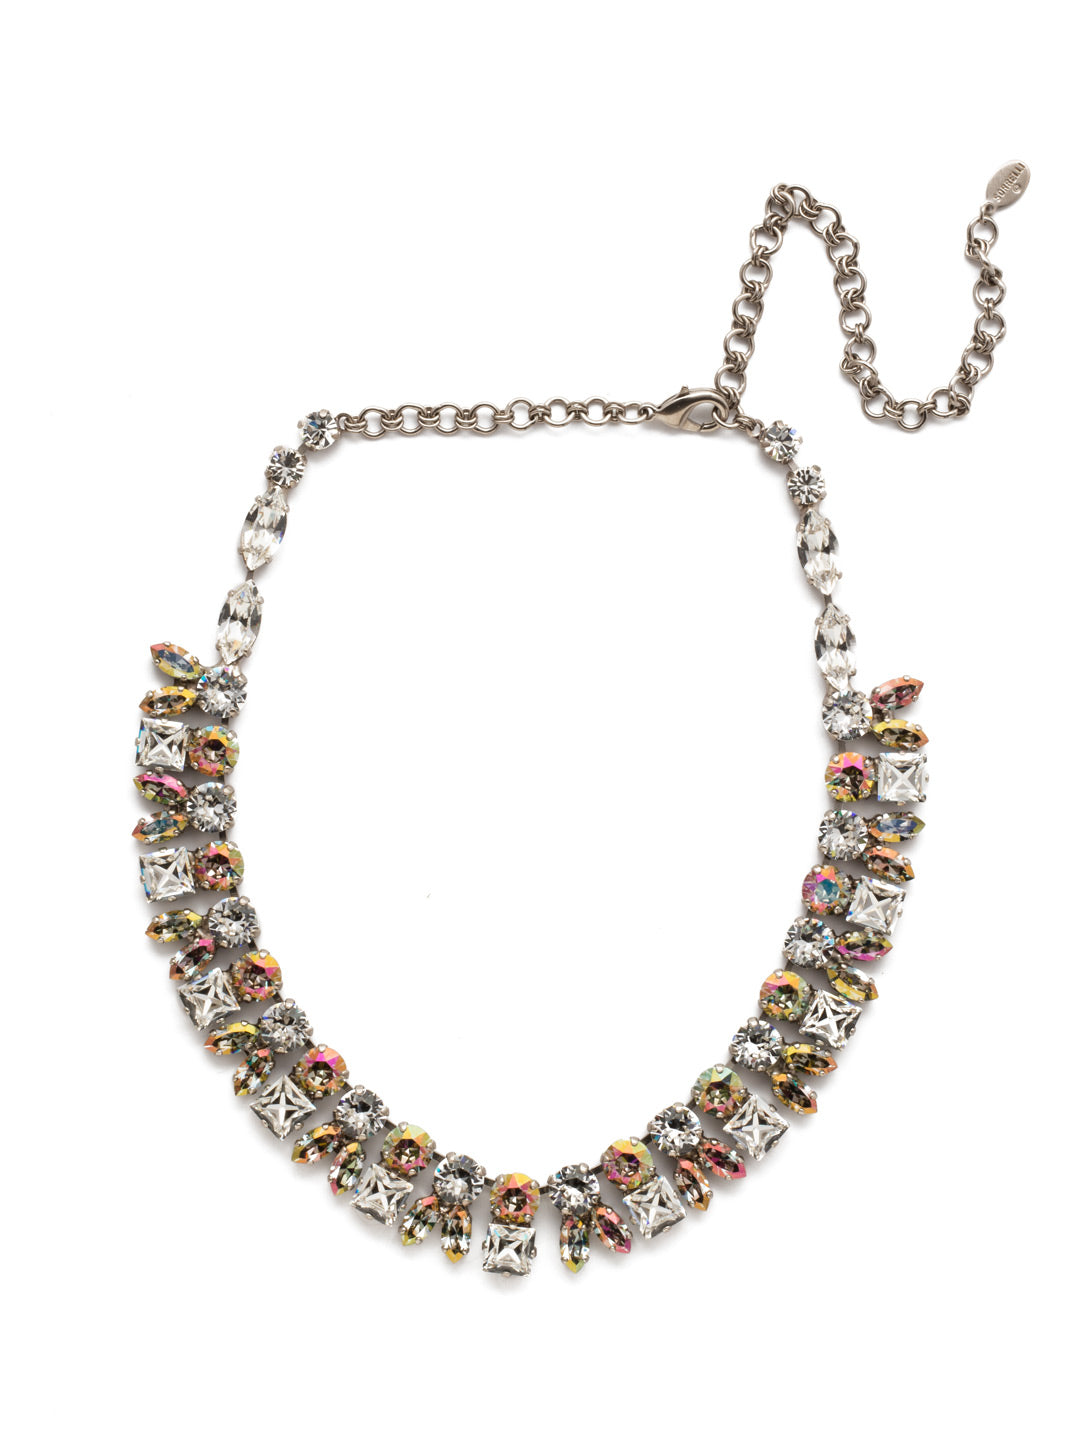 Paola Statement Necklace - NEP20ASCRE